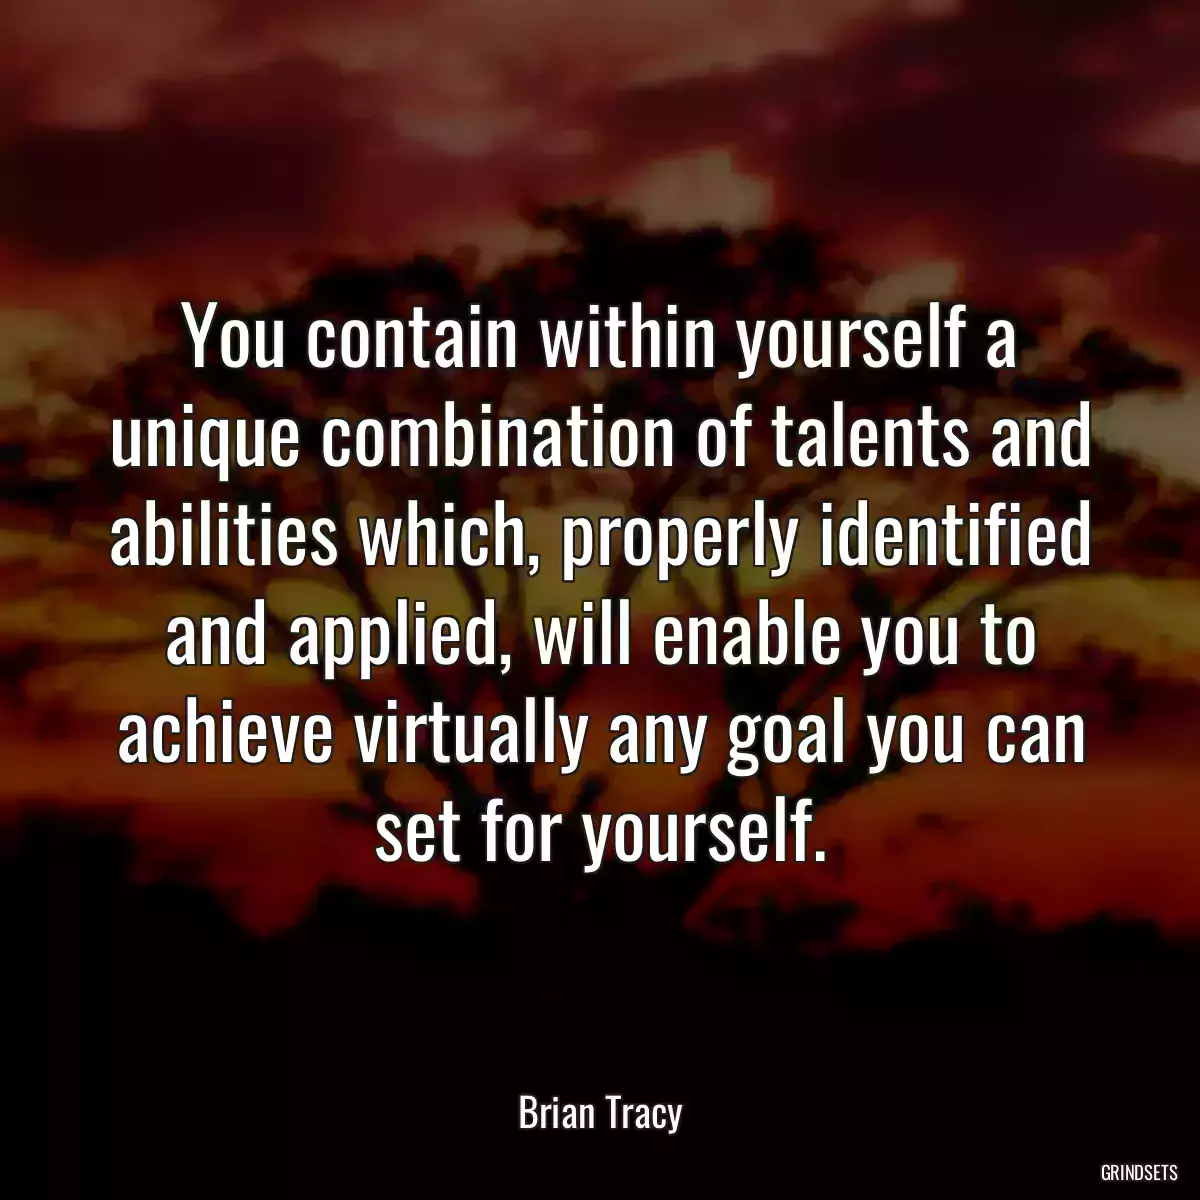 You contain within yourself a unique combination of talents and abilities which, properly identified and applied, will enable you to achieve virtually any goal you can set for yourself.